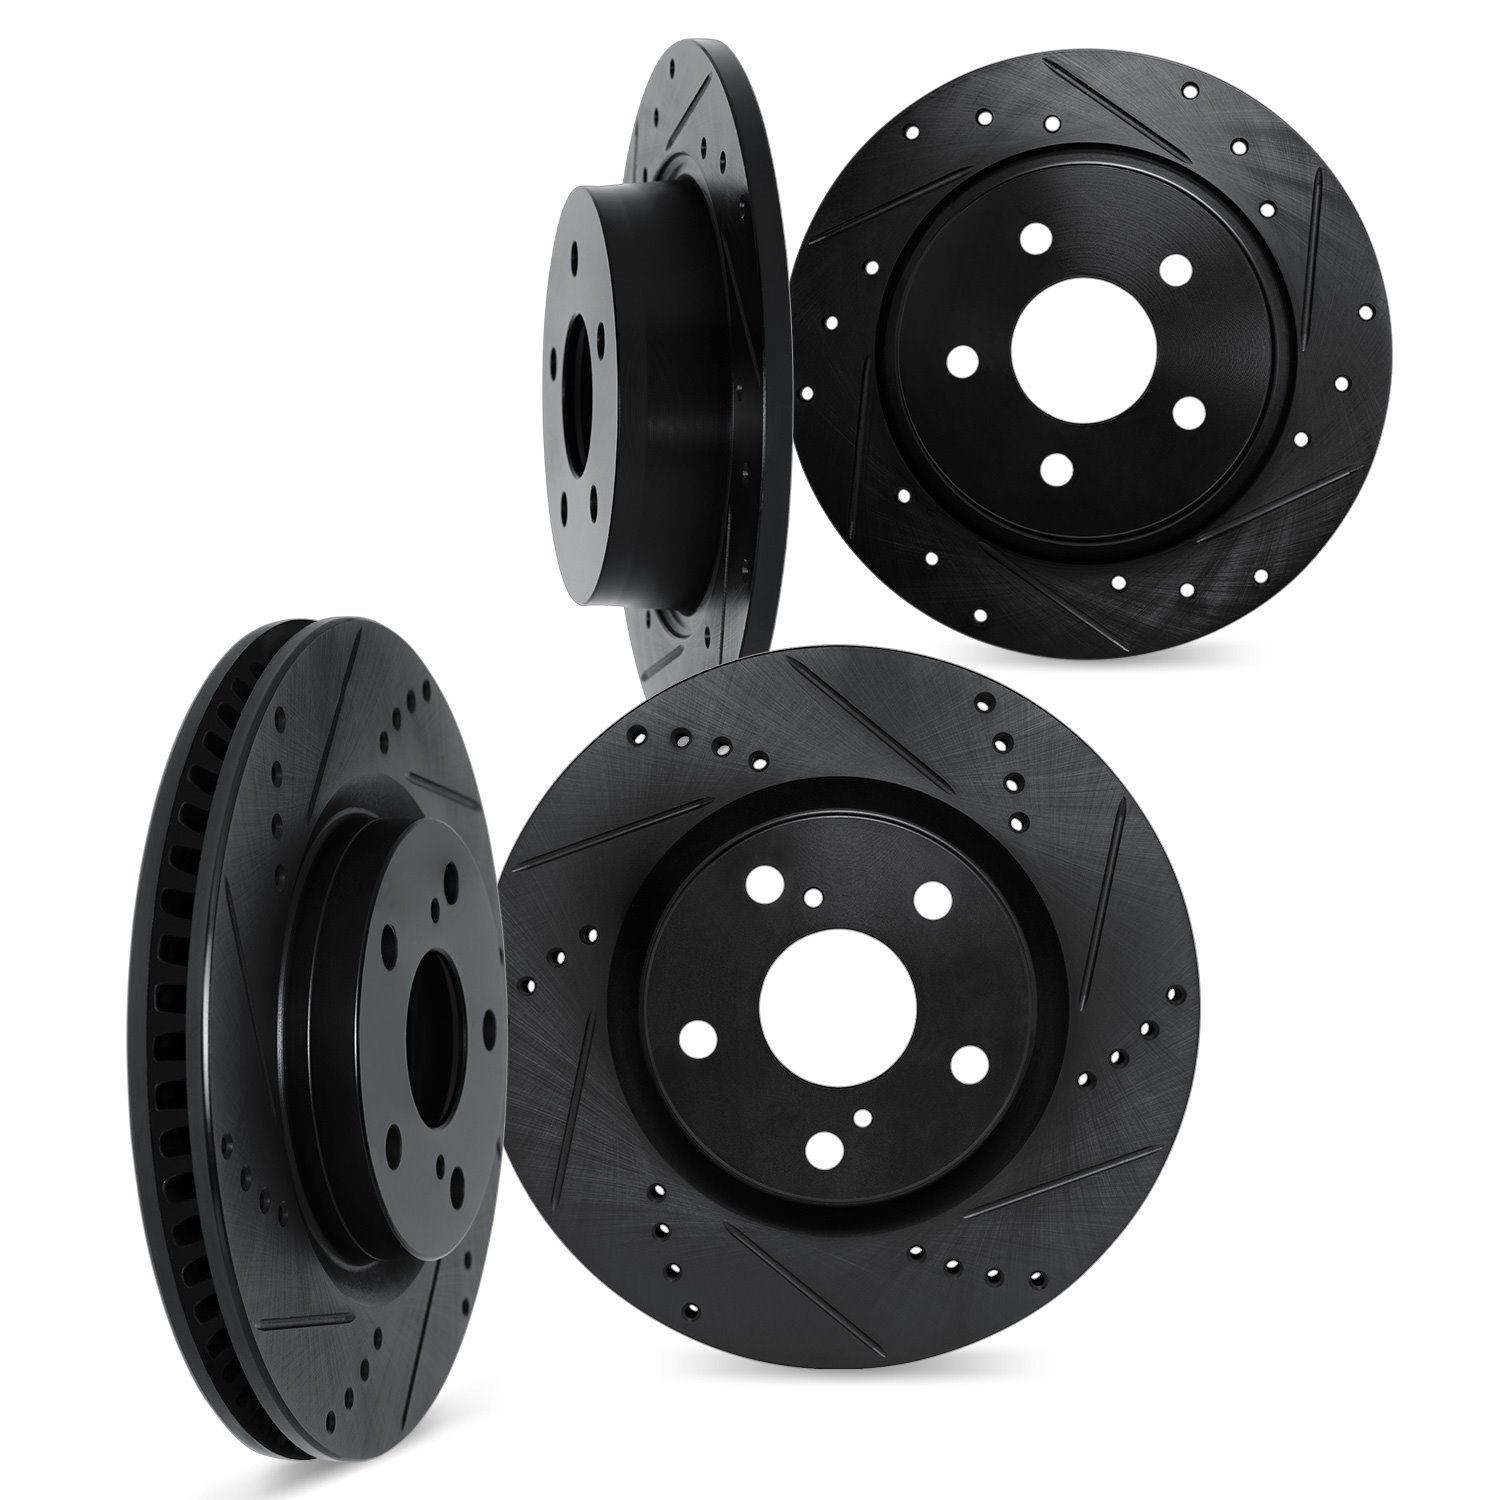 8004-75006 Drilled/Slotted Brake Rotors [Black], 1998-2010 Lexus/Toyota/Scion, Position: Front and Rear